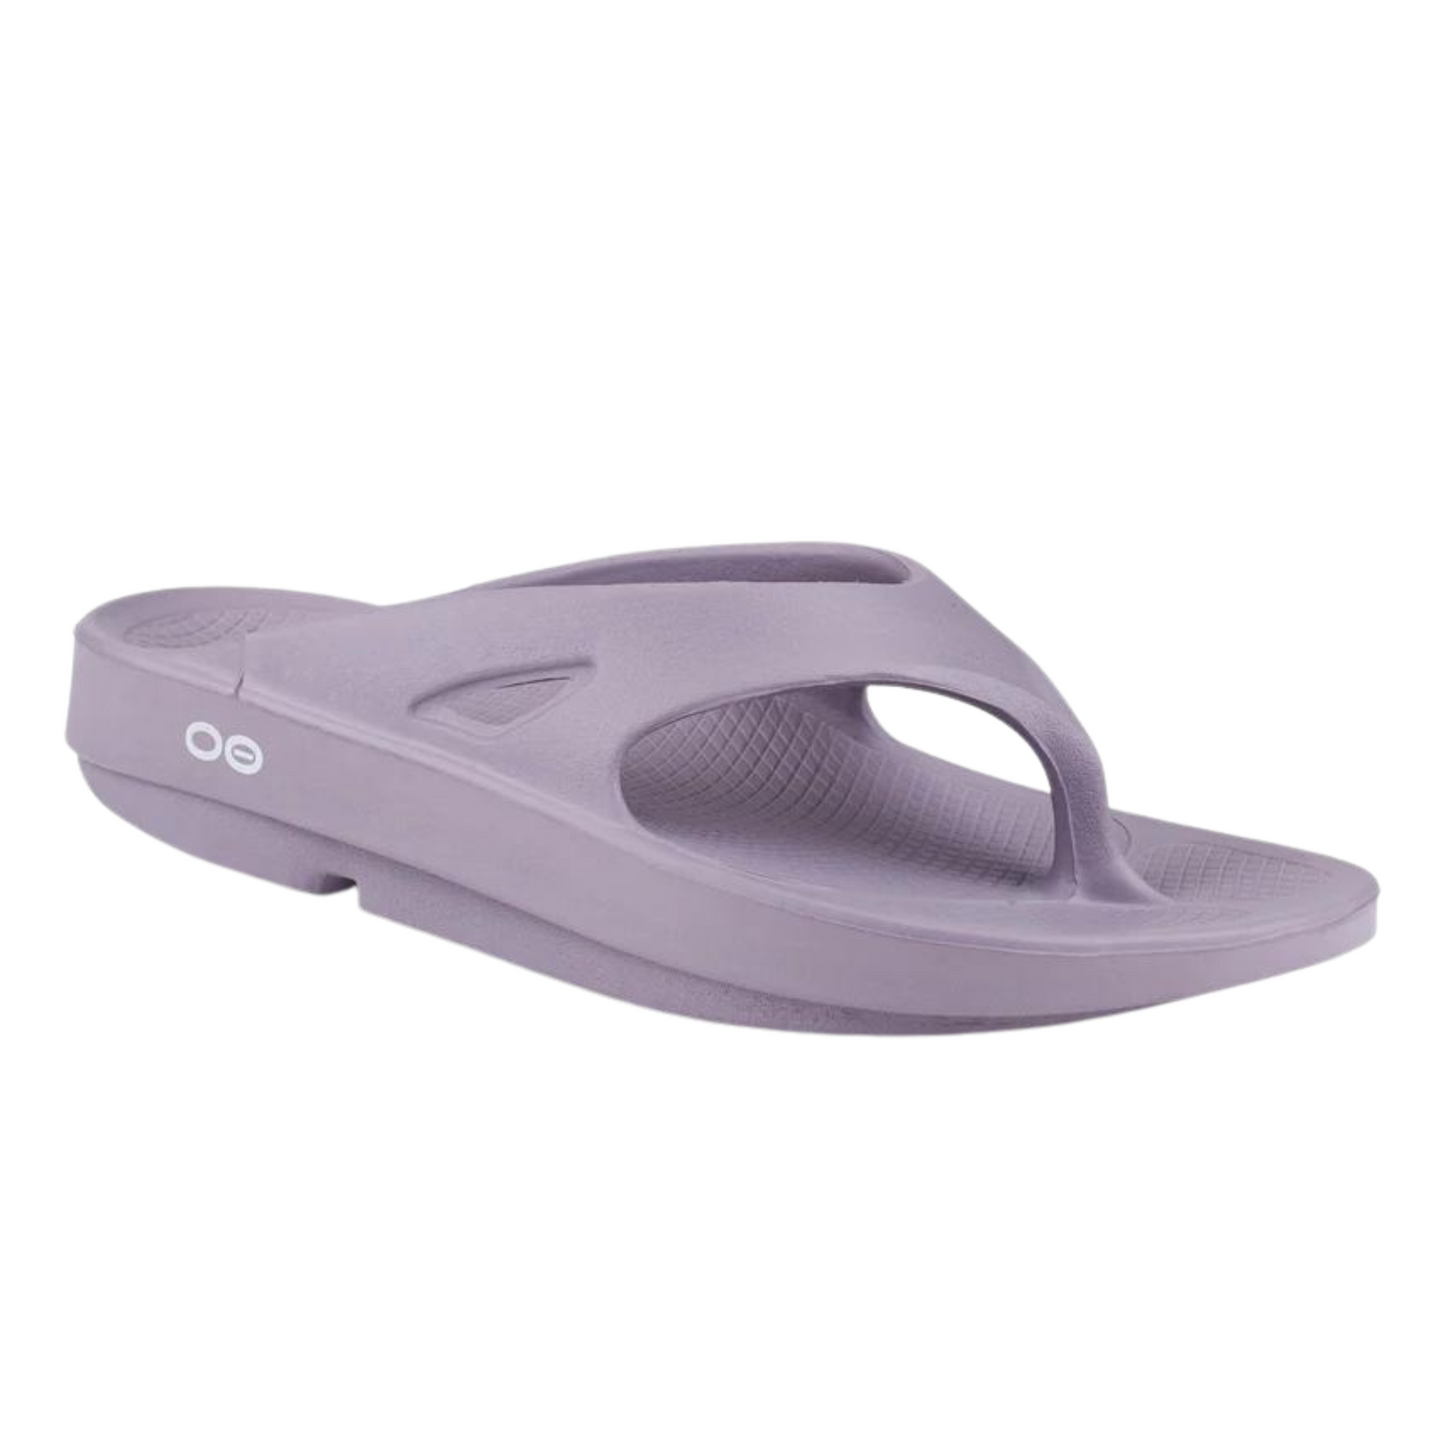 A right angle view of a light purple foam sandal with a between-toe strap.